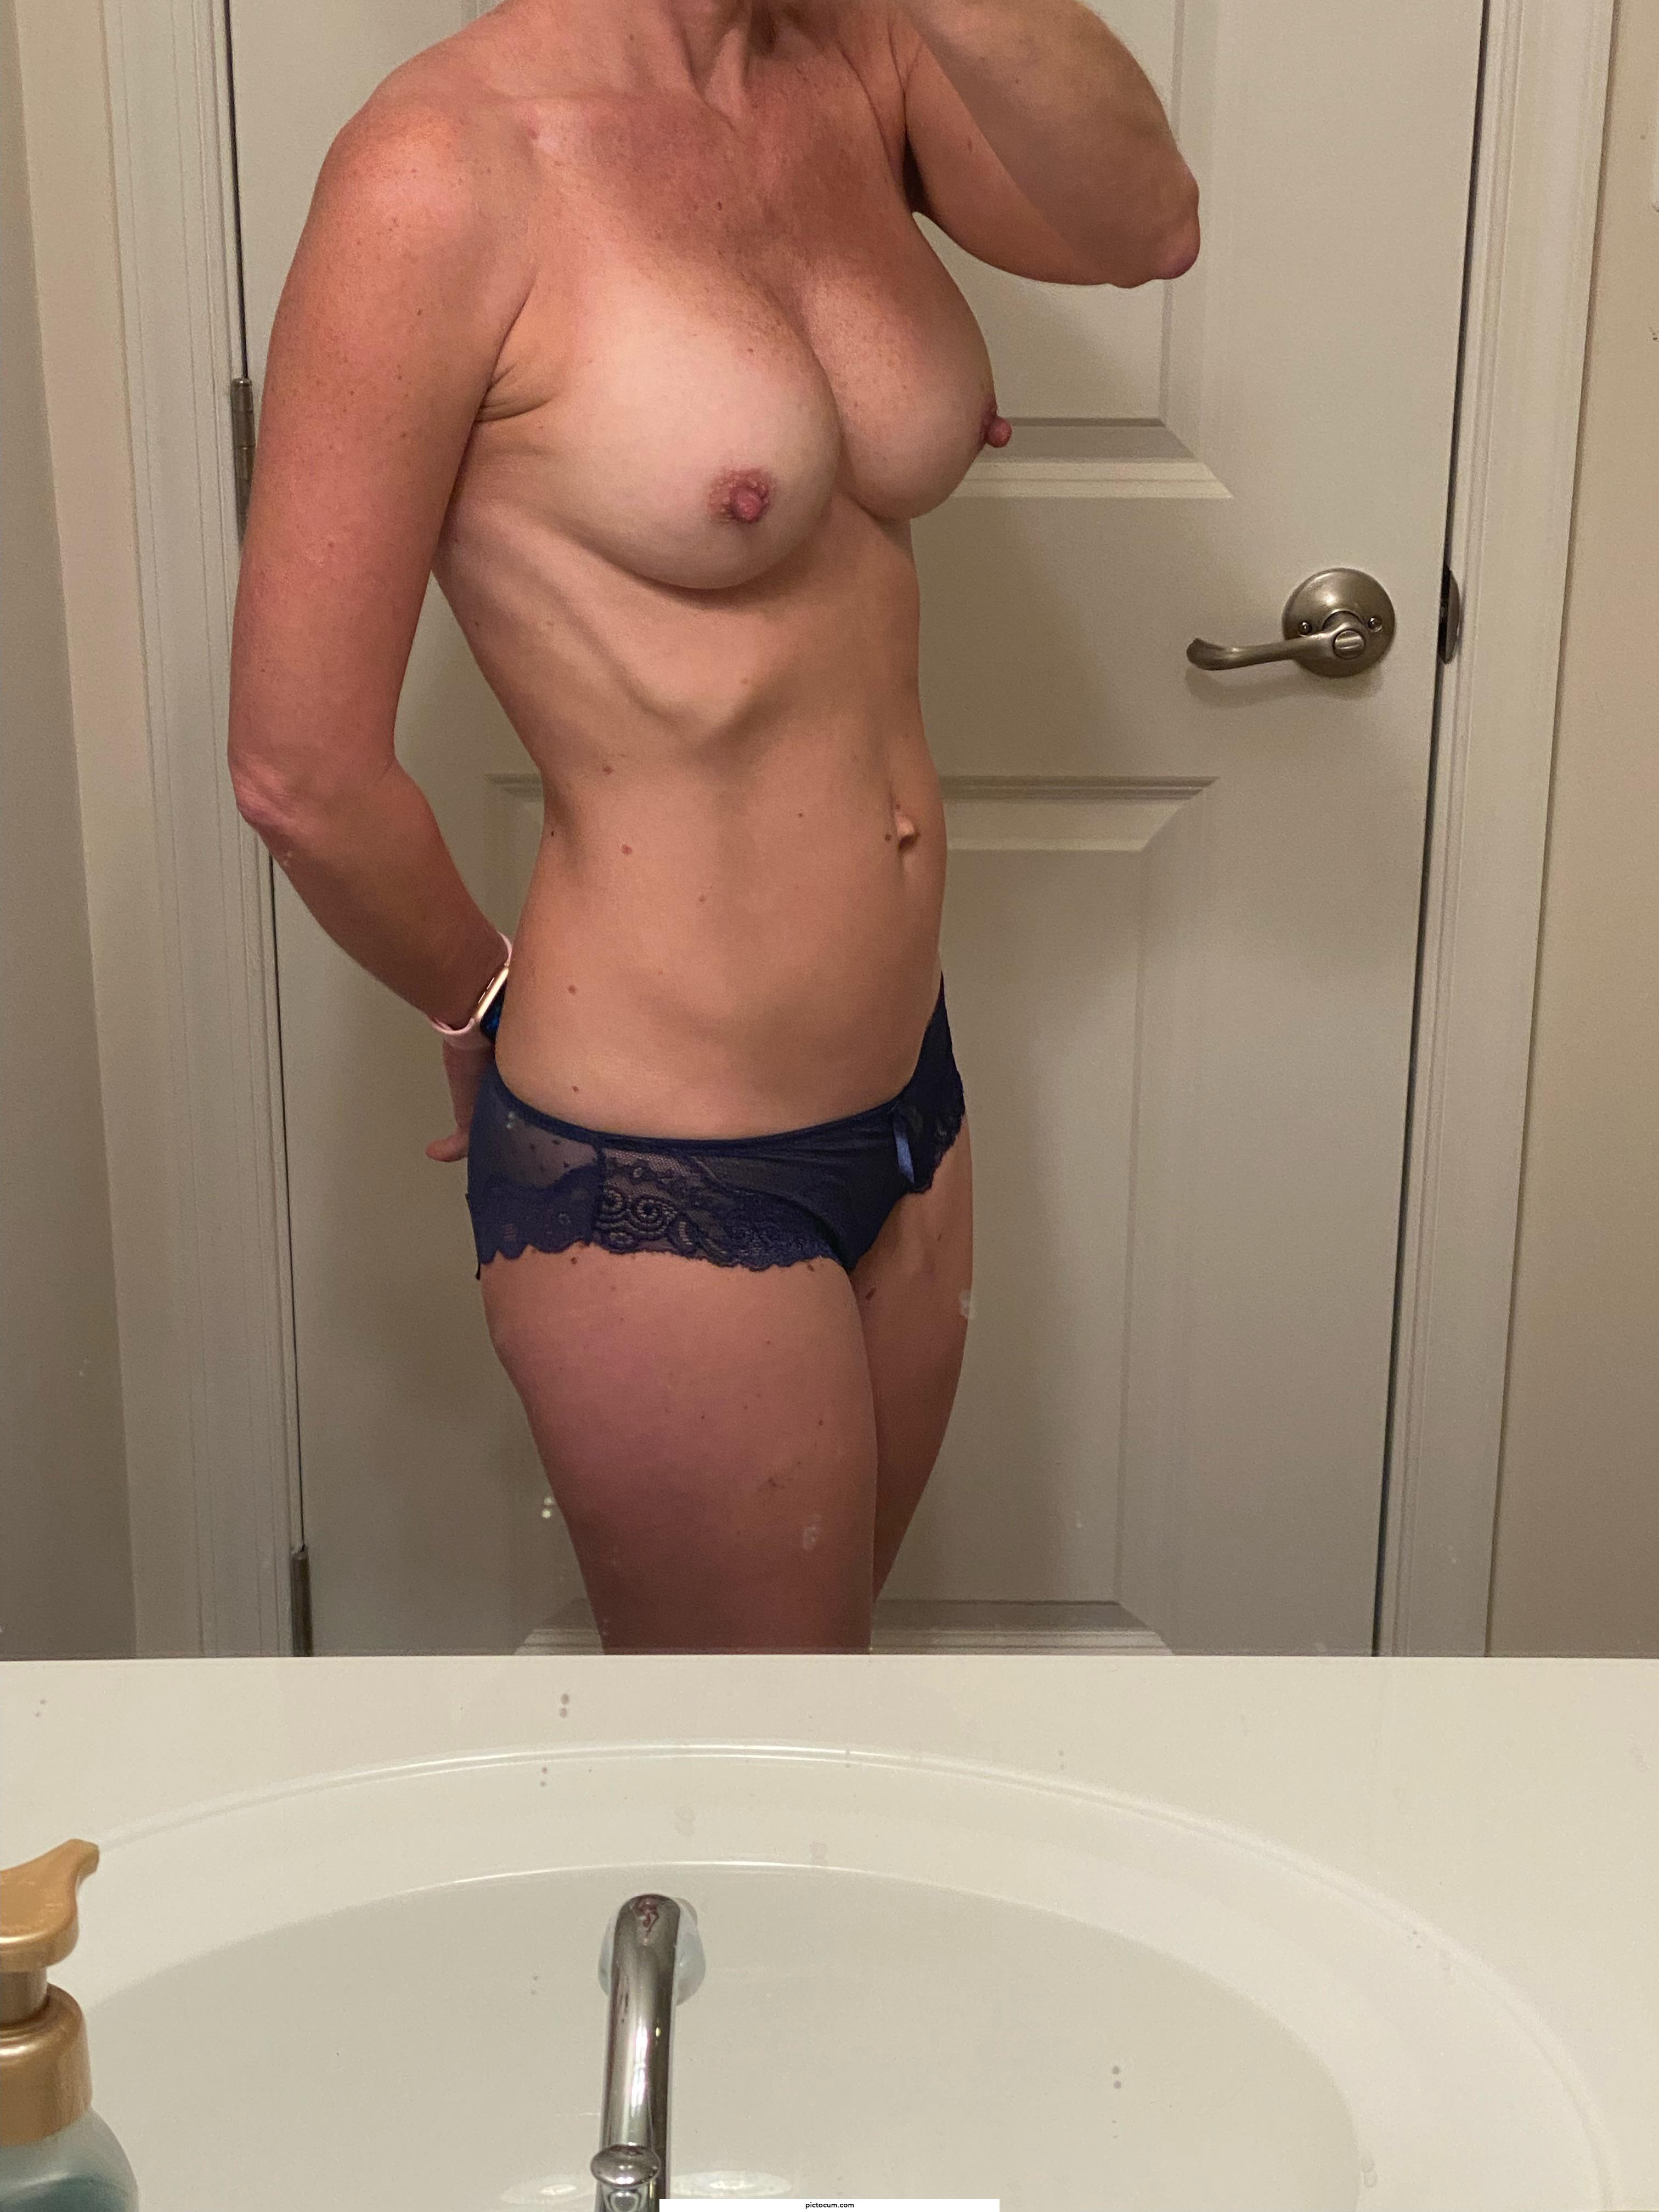 What would you do to this mom in her forties?